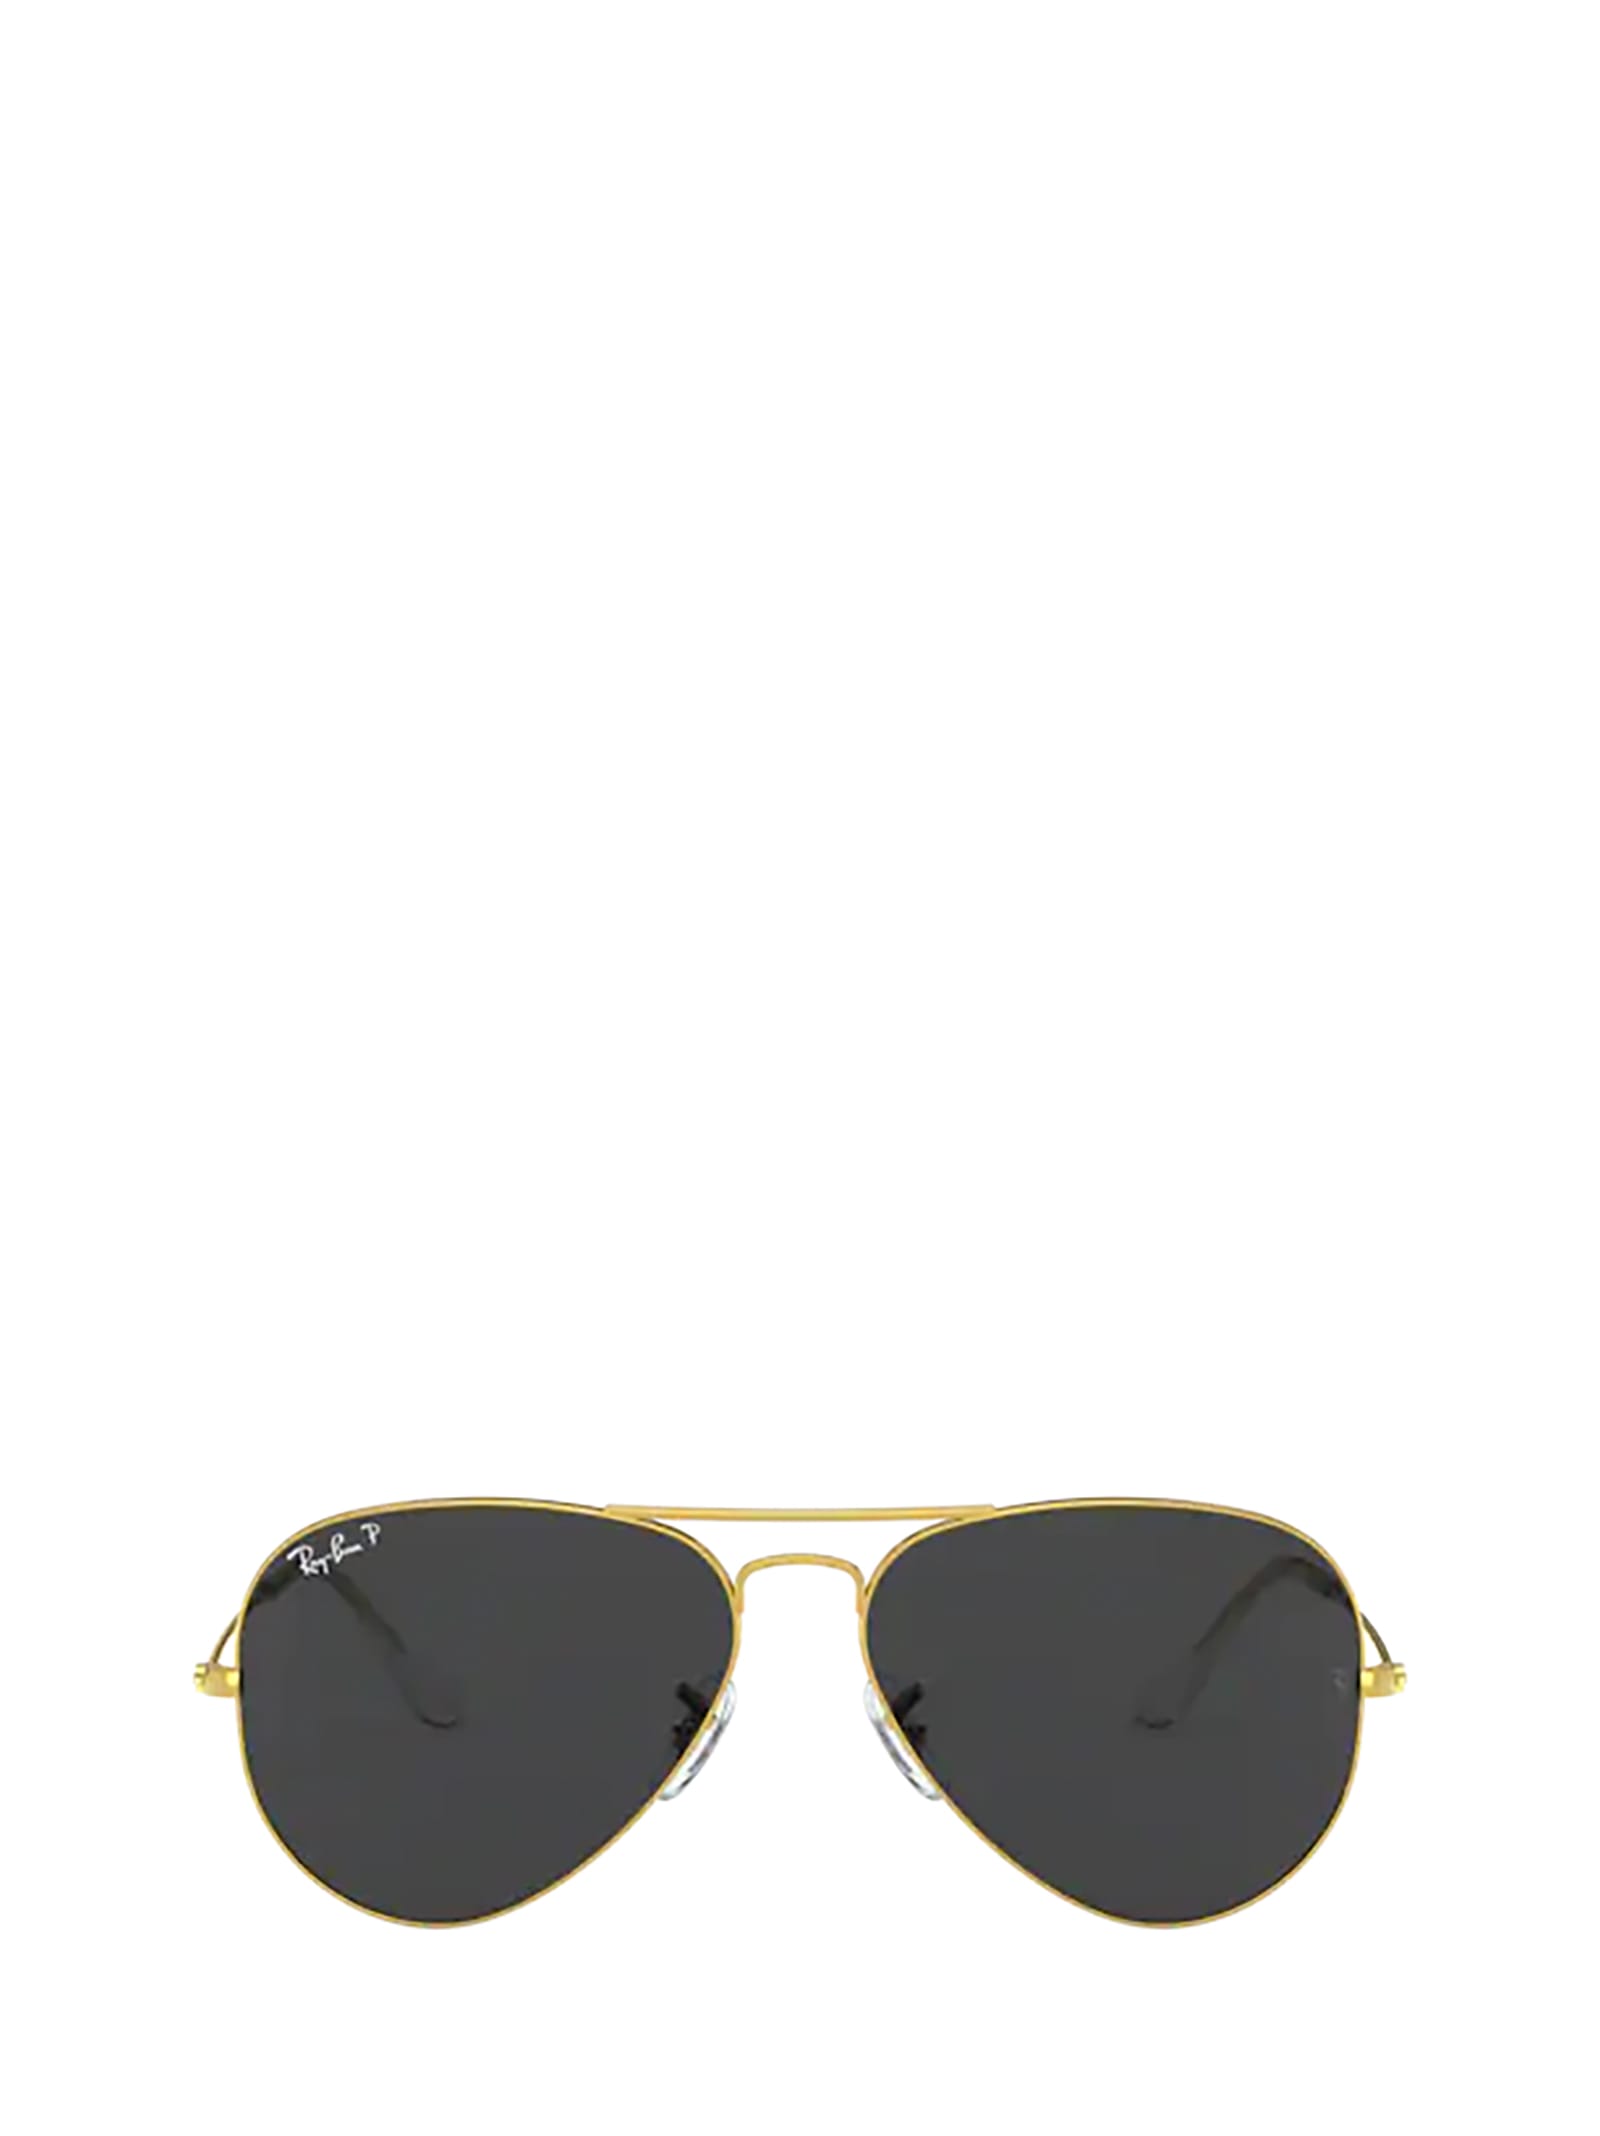 RAY BAN RAY-BAN RB3025 LEGEND GOLD SUNGLASSES,RB3025 919648